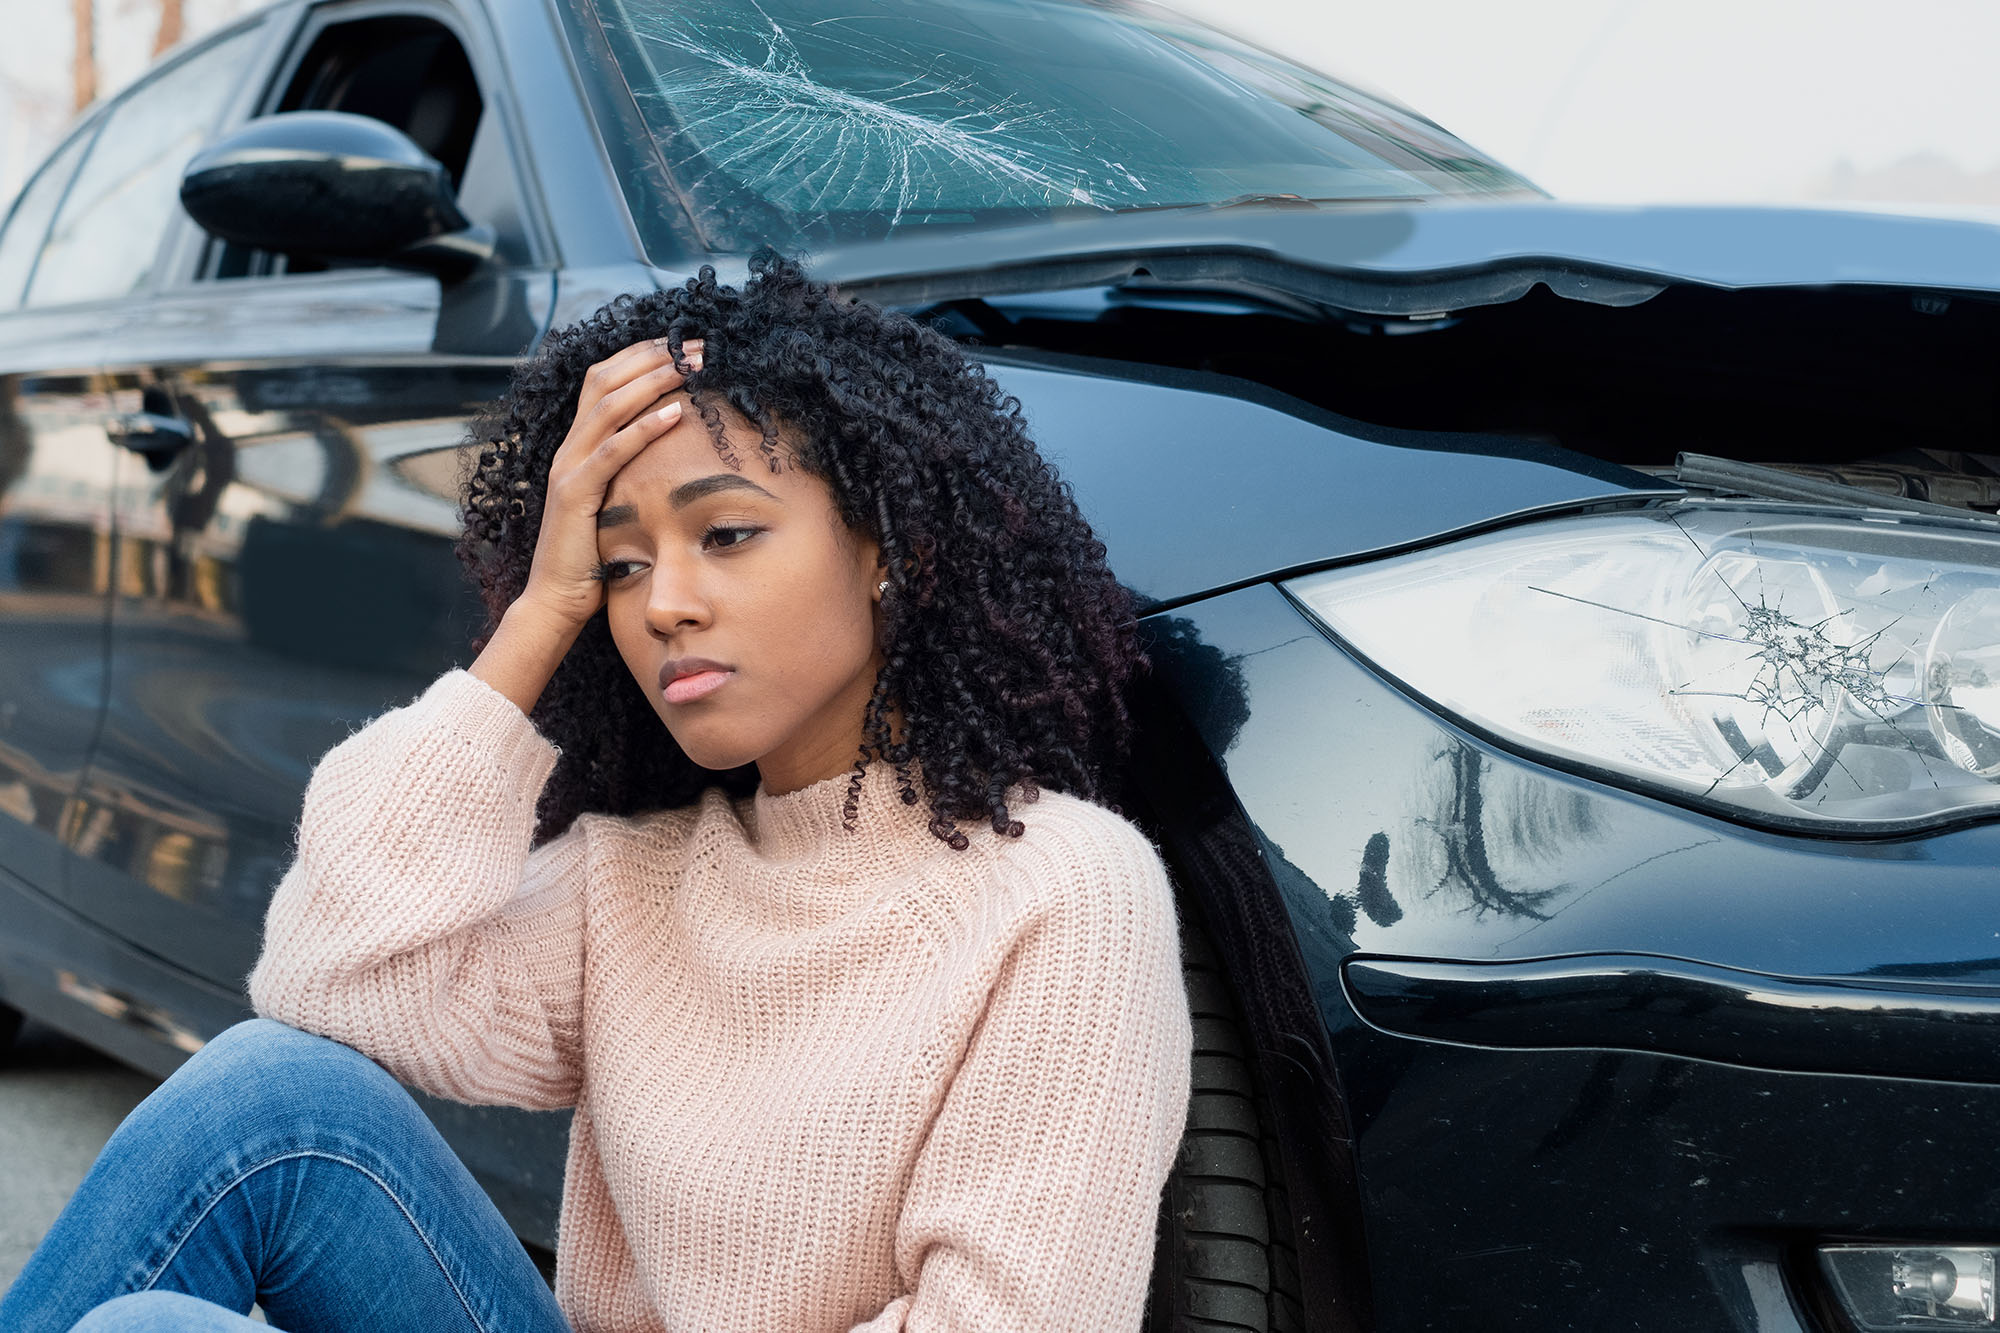 car accident claims solicitors of reading - no win, no fee personal injury